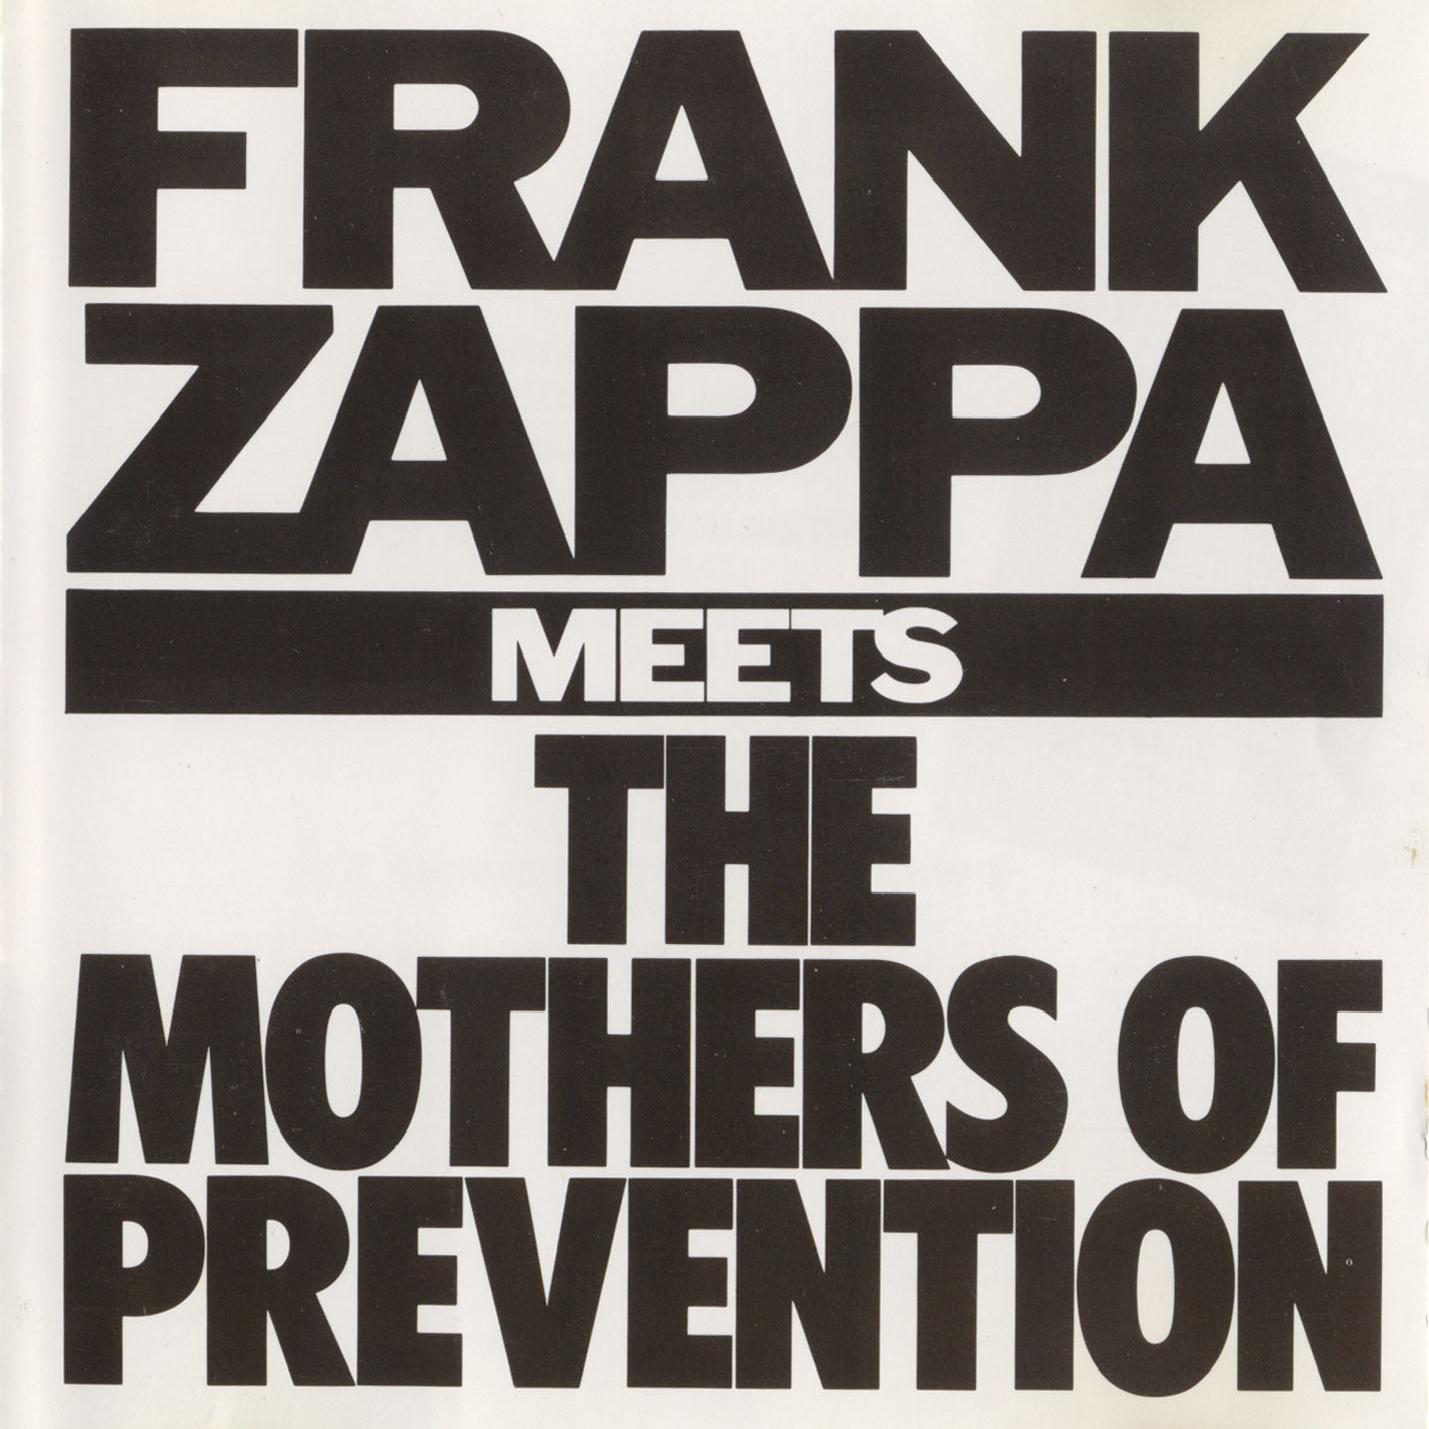 Frank Zappa - Frank Zappa Meets The Mothers Of Prevention (1985)